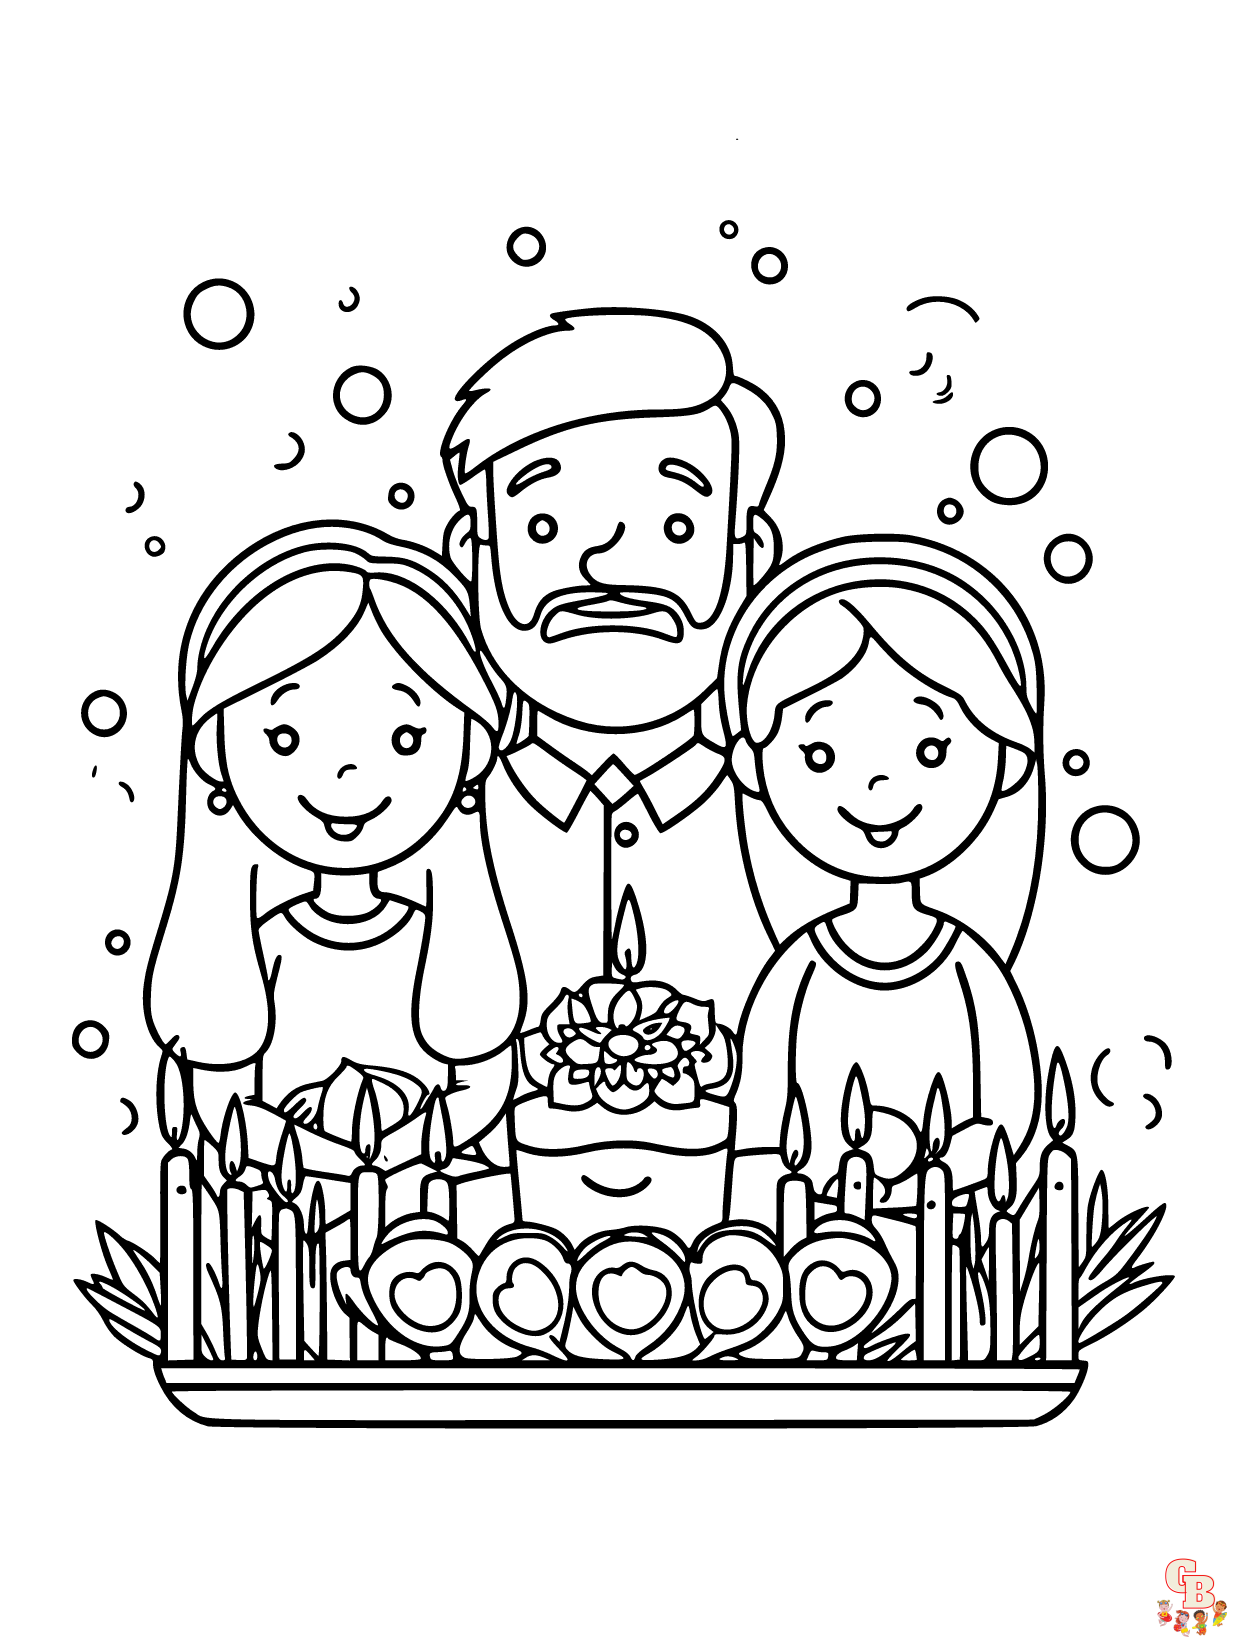 Shavuot coloring pages printable